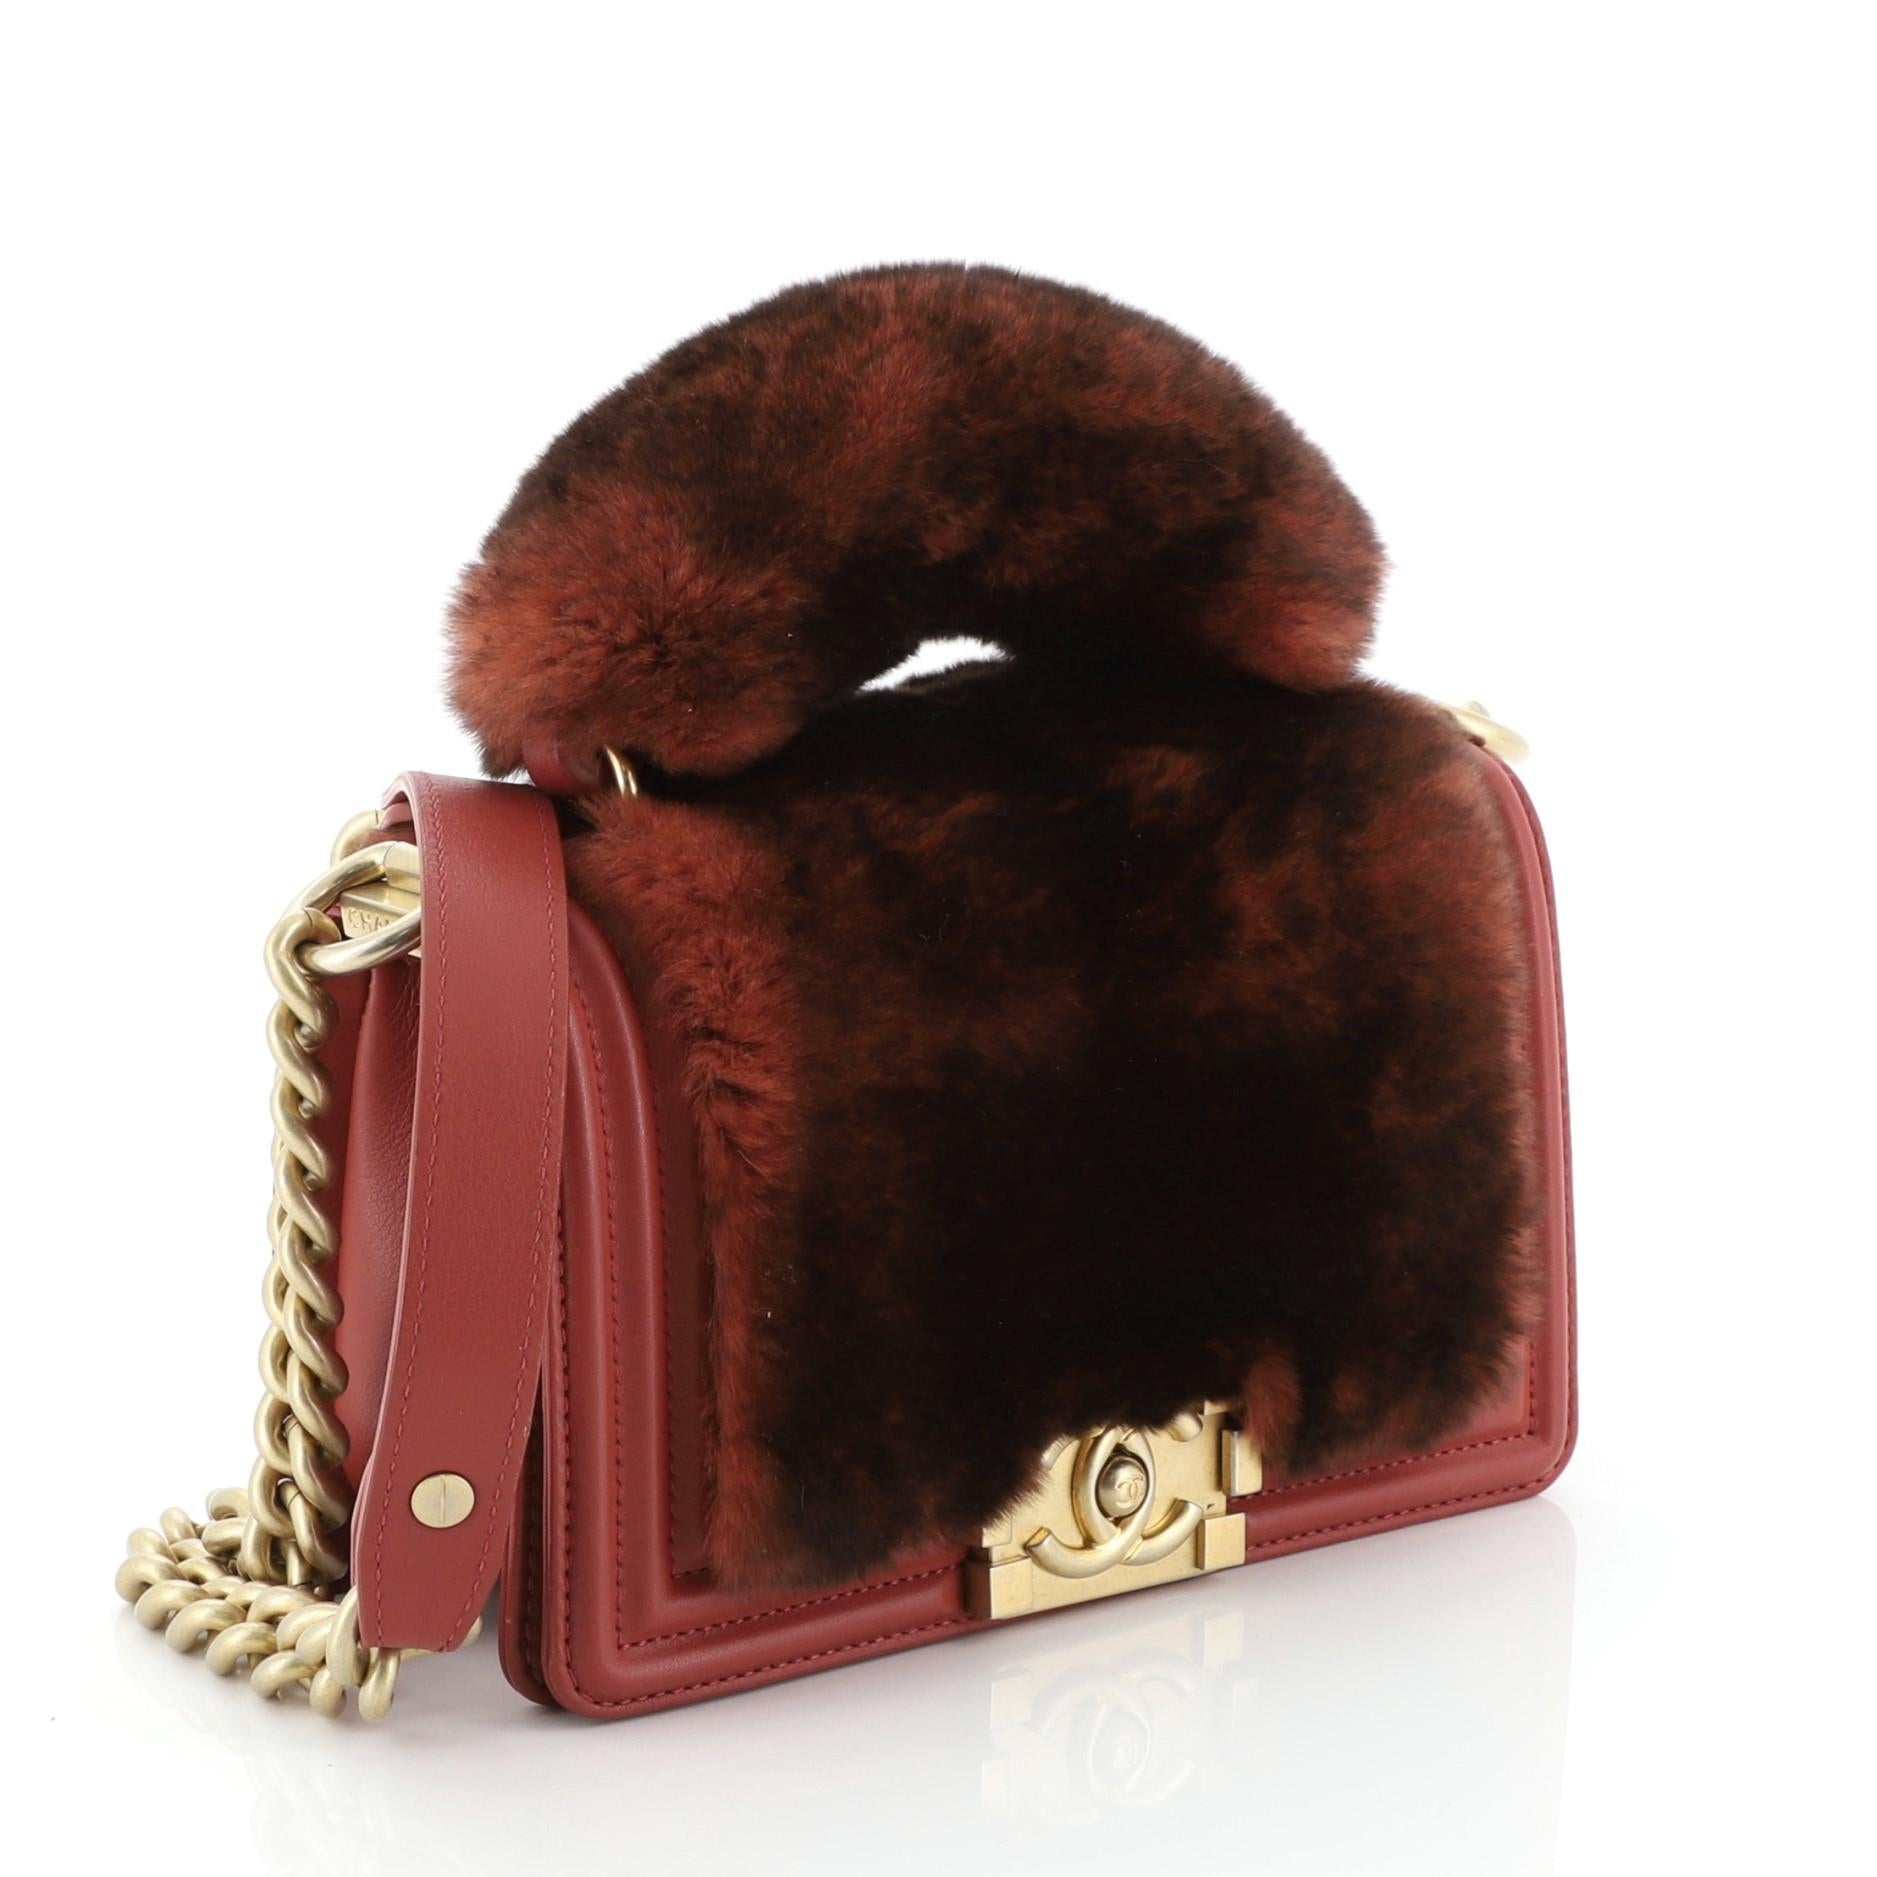 This Chanel Top Handle Boy Flap Bag Fur Small, crafted from red fur, features chunky chain link strap with shoulder pad, fur top handle, and gold-tone hardware. Its CC boy push-lock closure opens to a red fabric interior with side slip pocket.